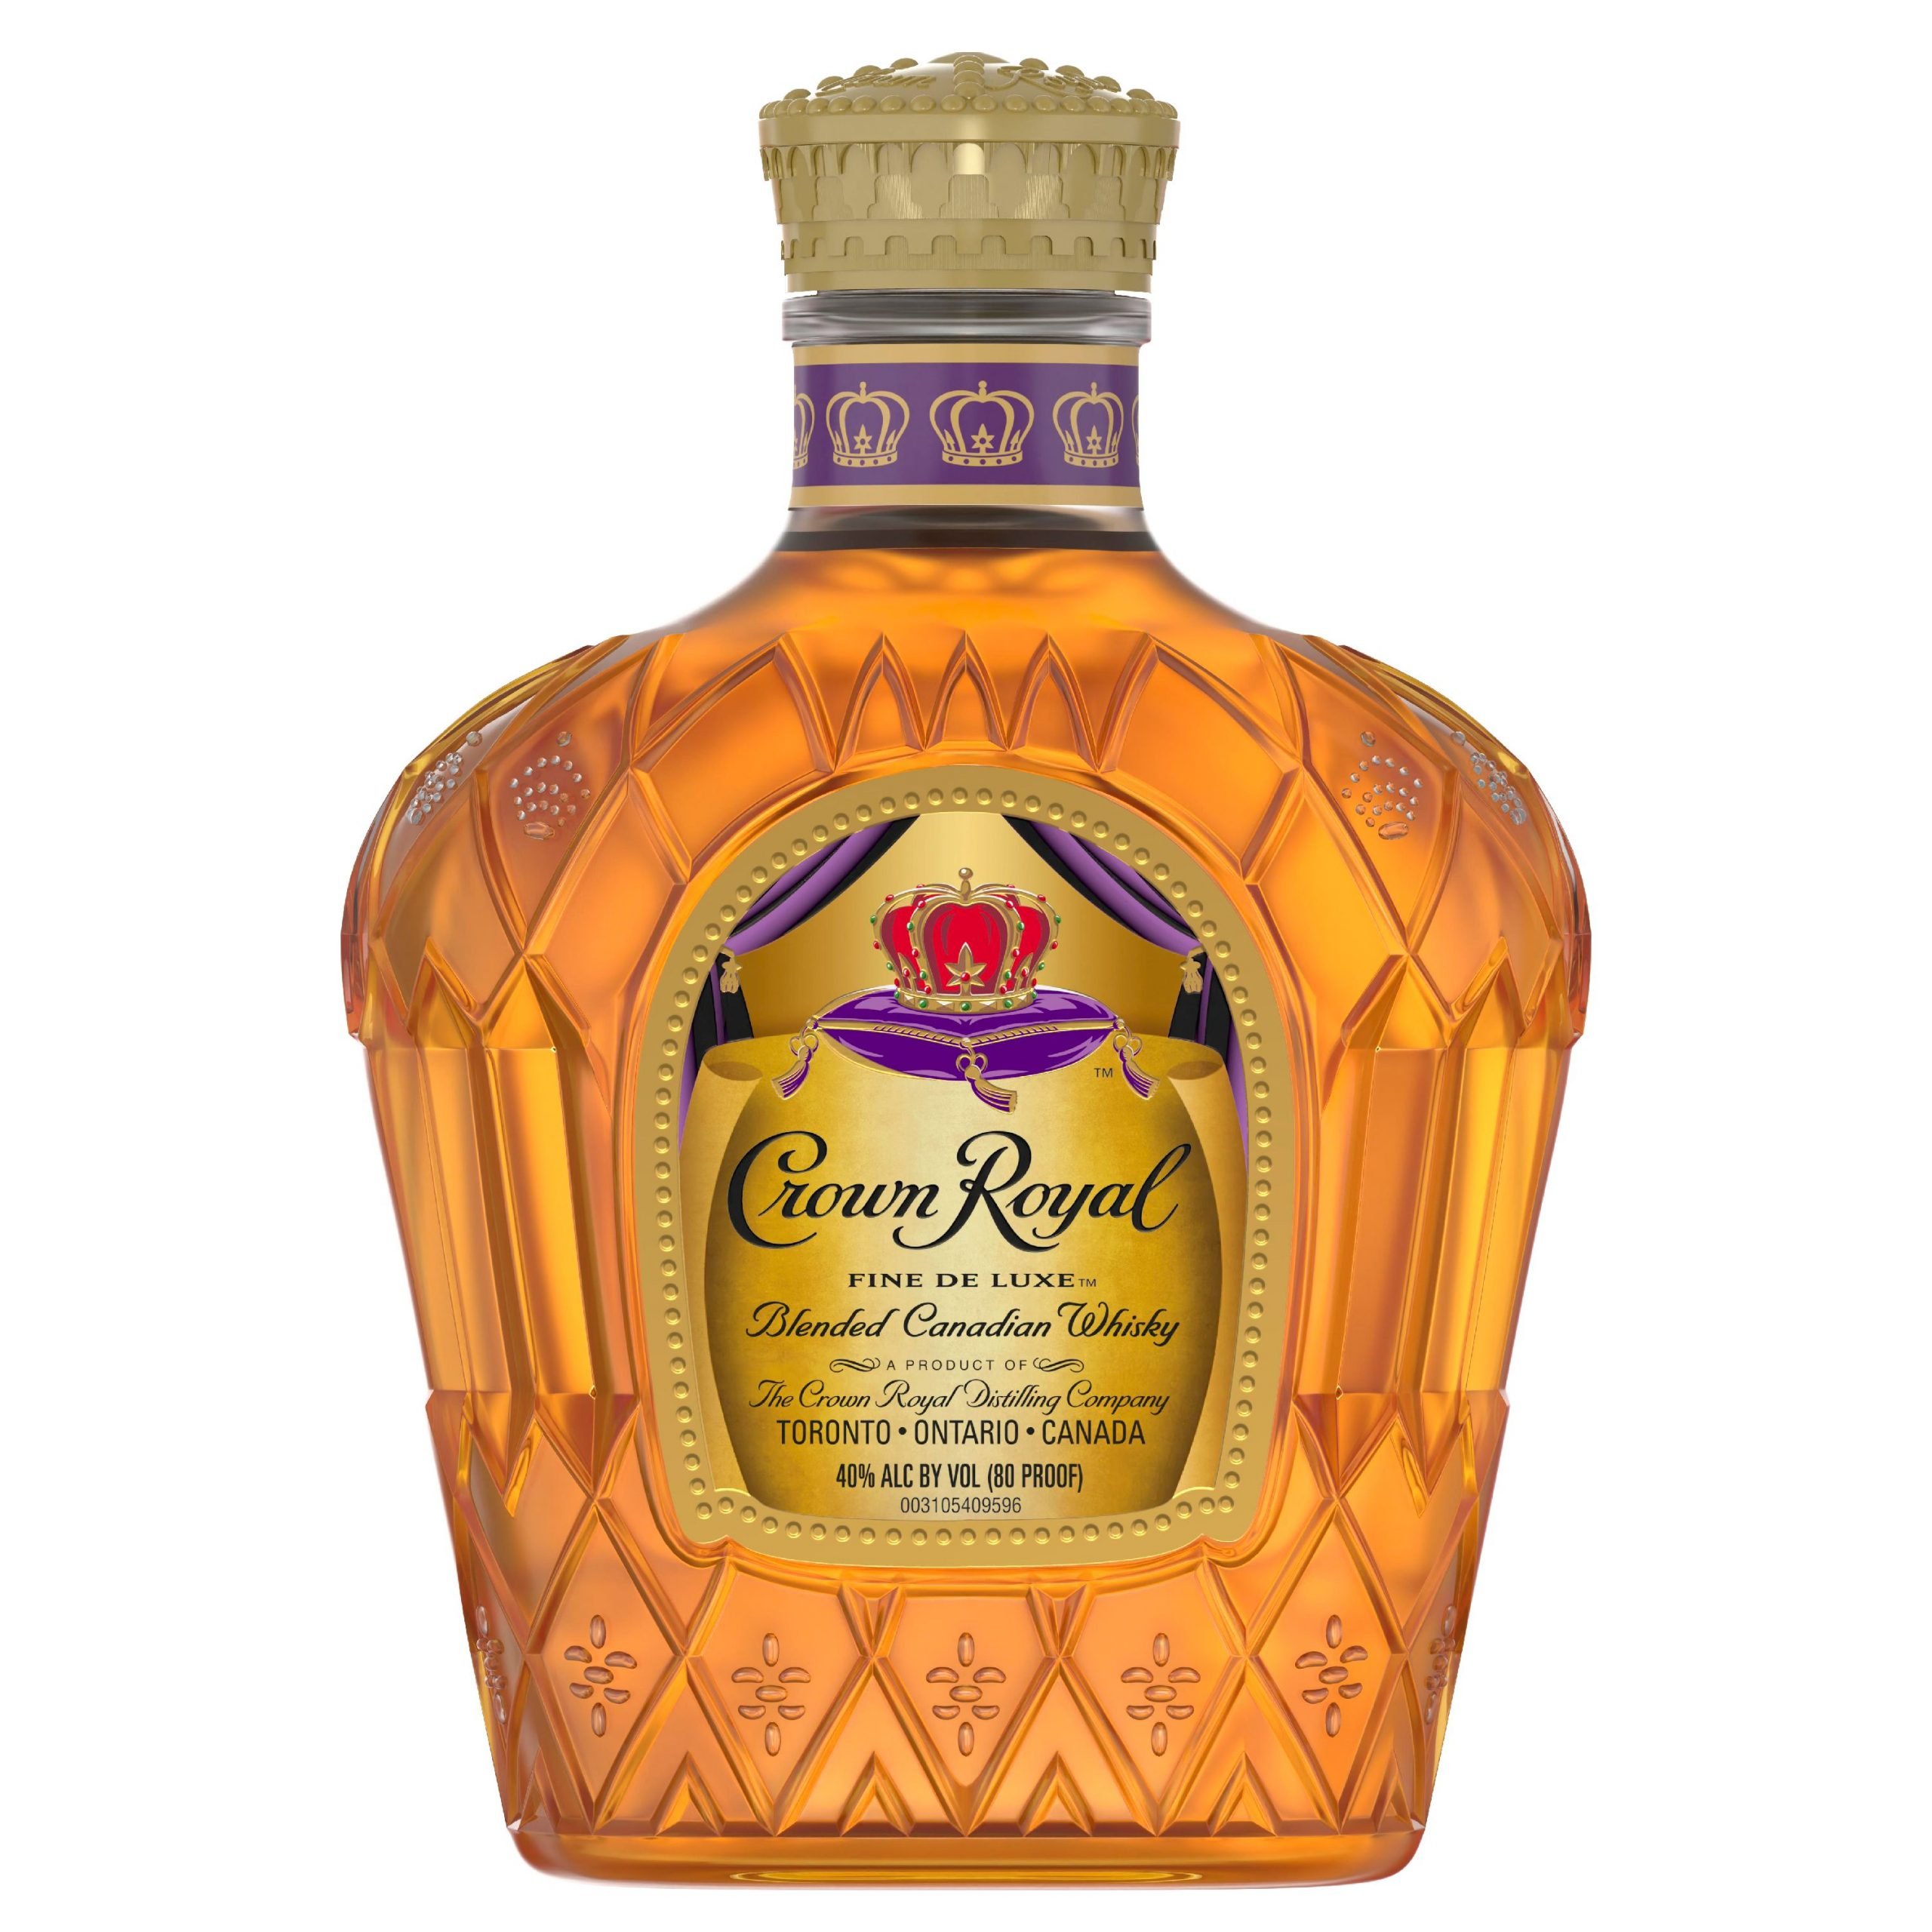 Crown Royal Fine Deluxe Blended Canadian Whisky, 375 mL (80 Proof ...